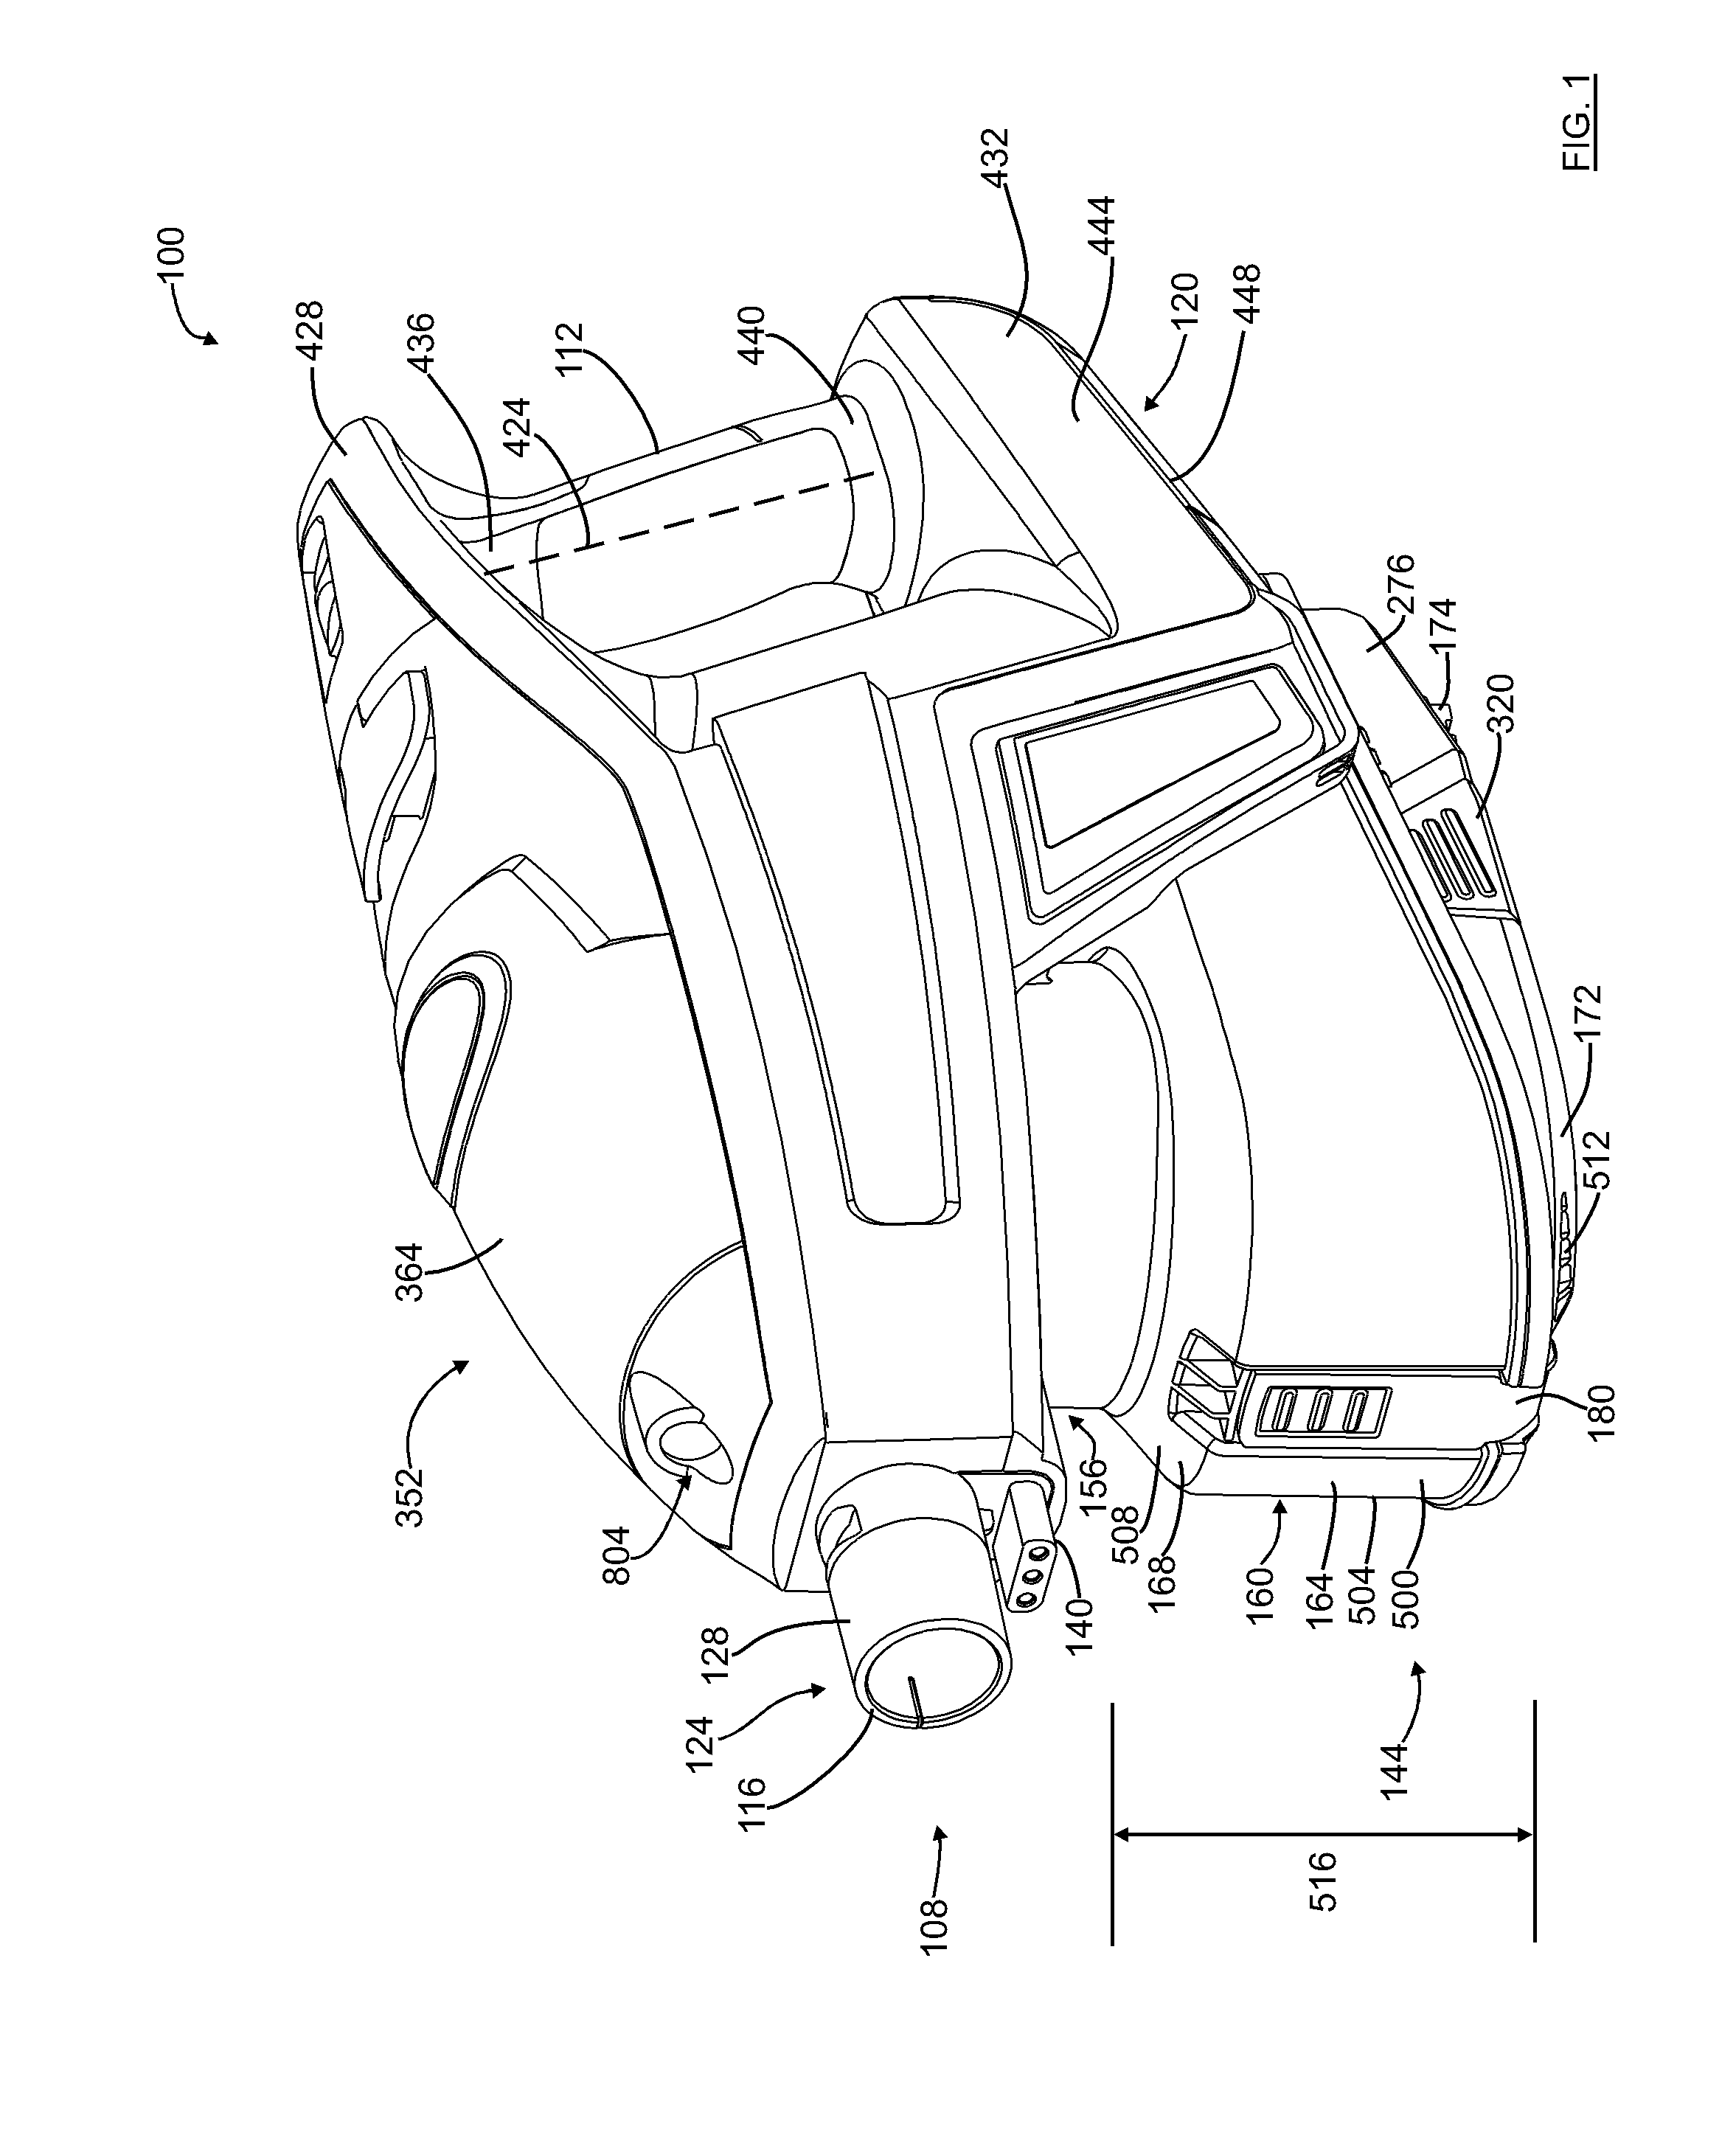 Portable surface cleaning apparatus